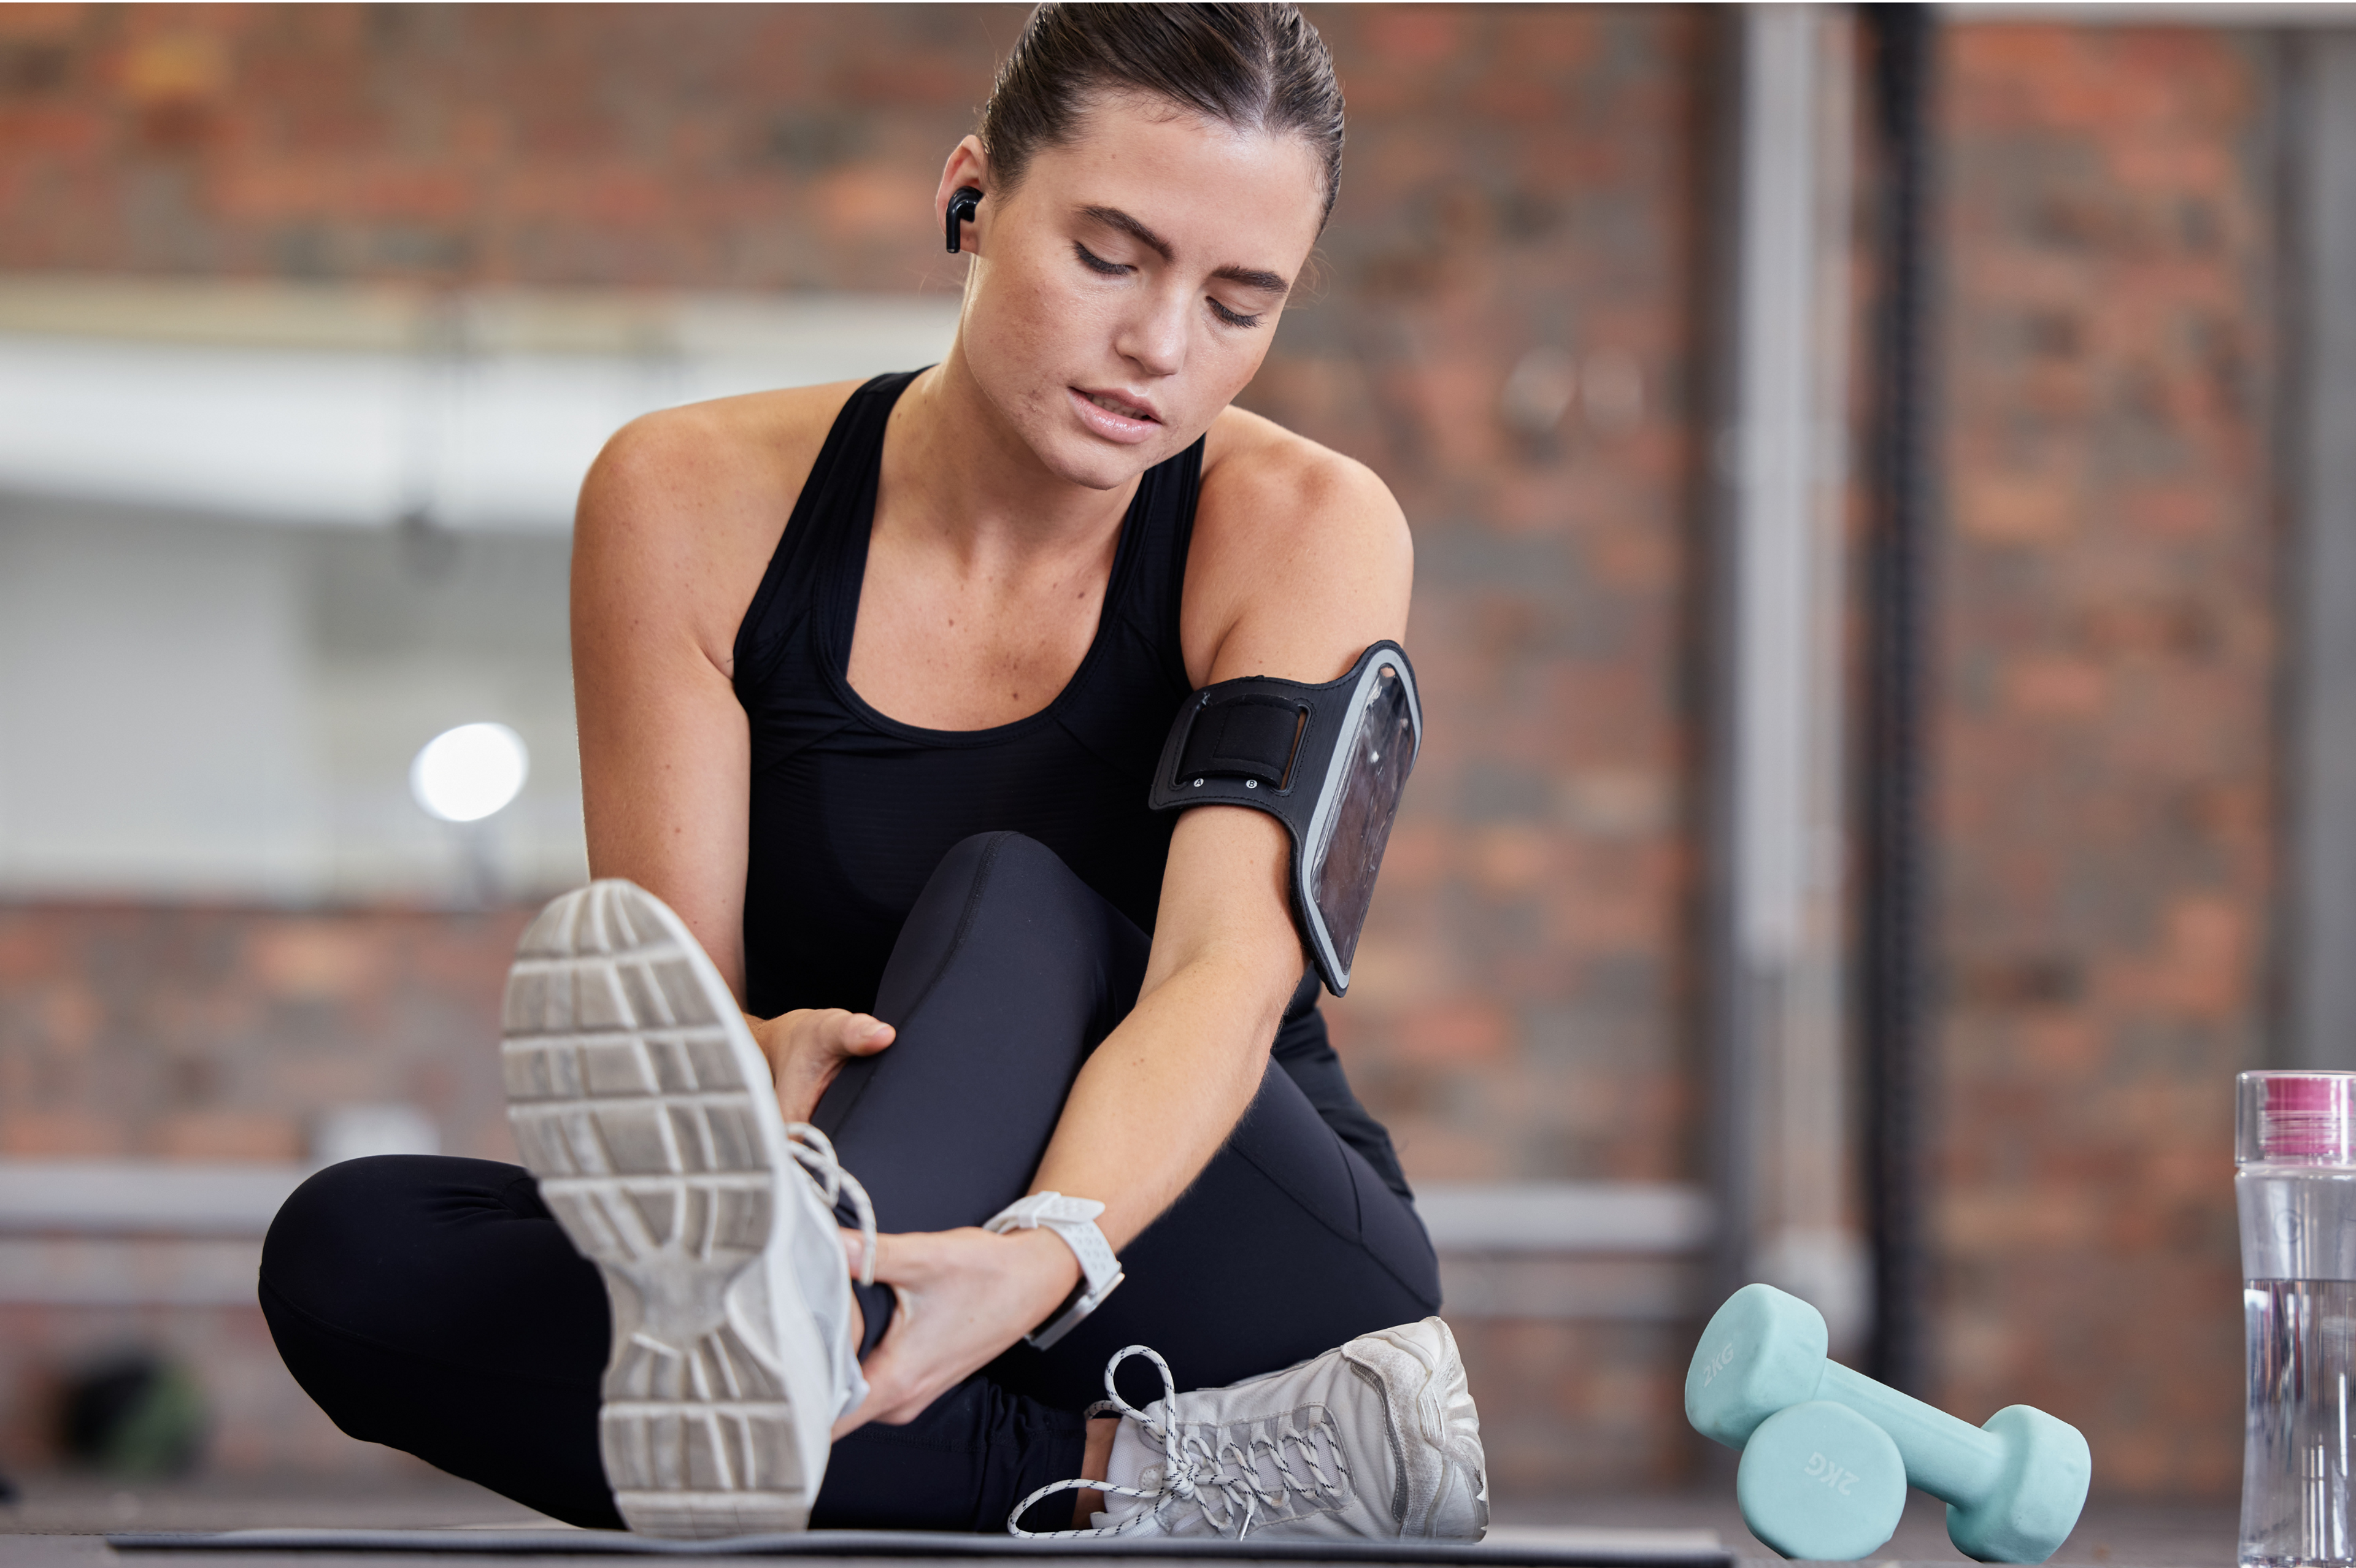 If you have to ice your Achilles after every workout due to increased pain, your rehab exercises are too intense for your tendon's current stage of healing.